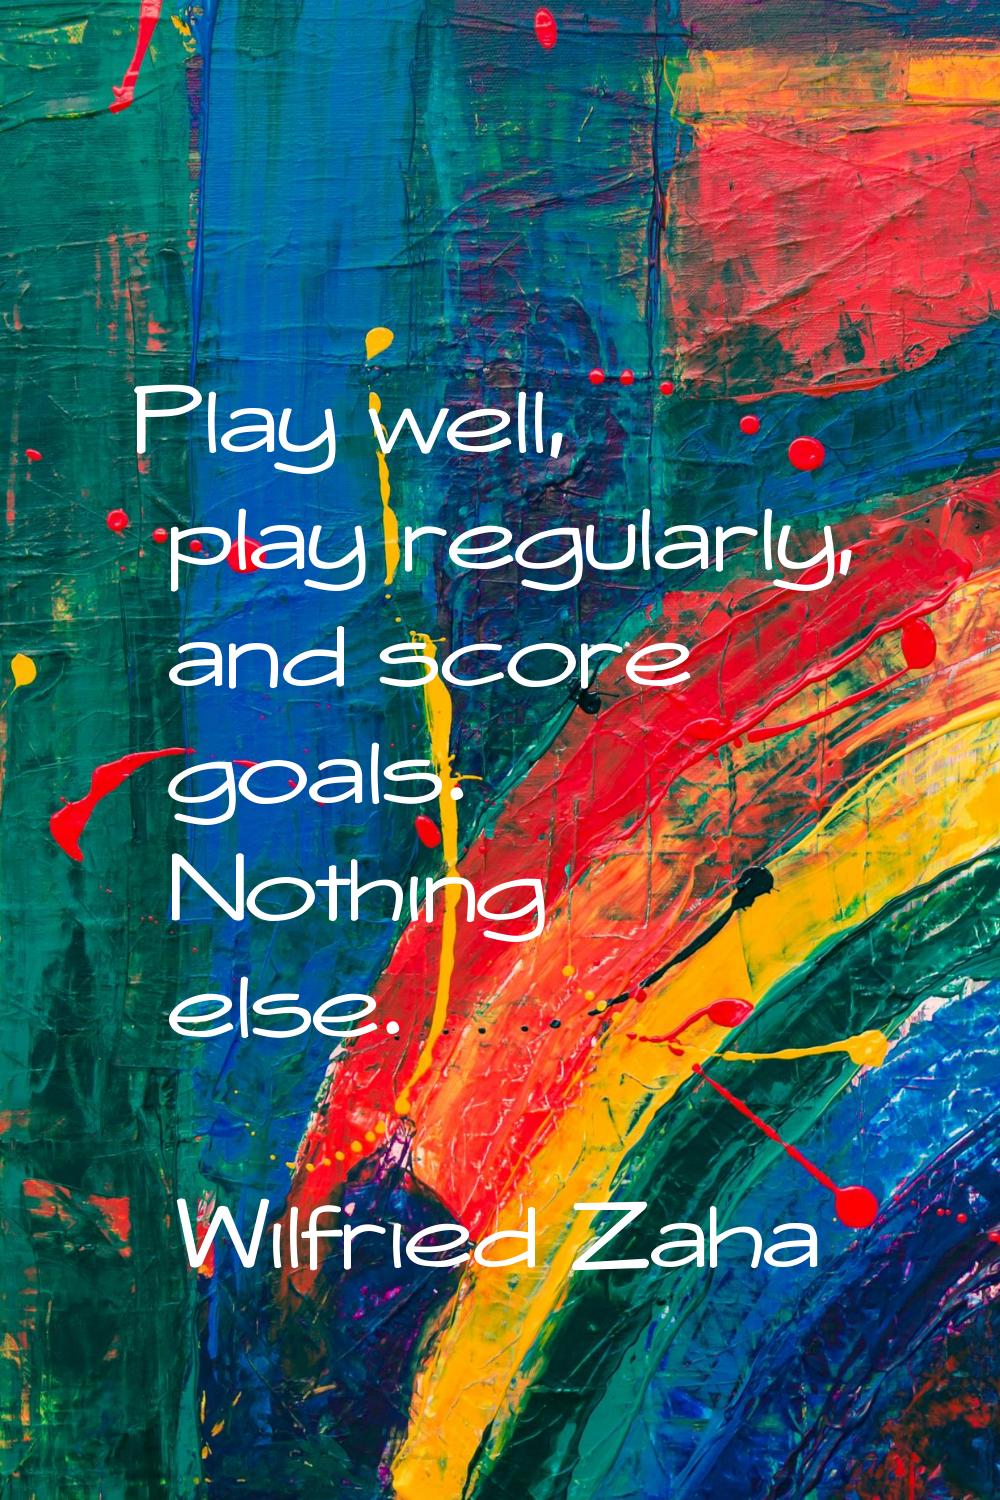 Play well, play regularly, and score goals. Nothing else.